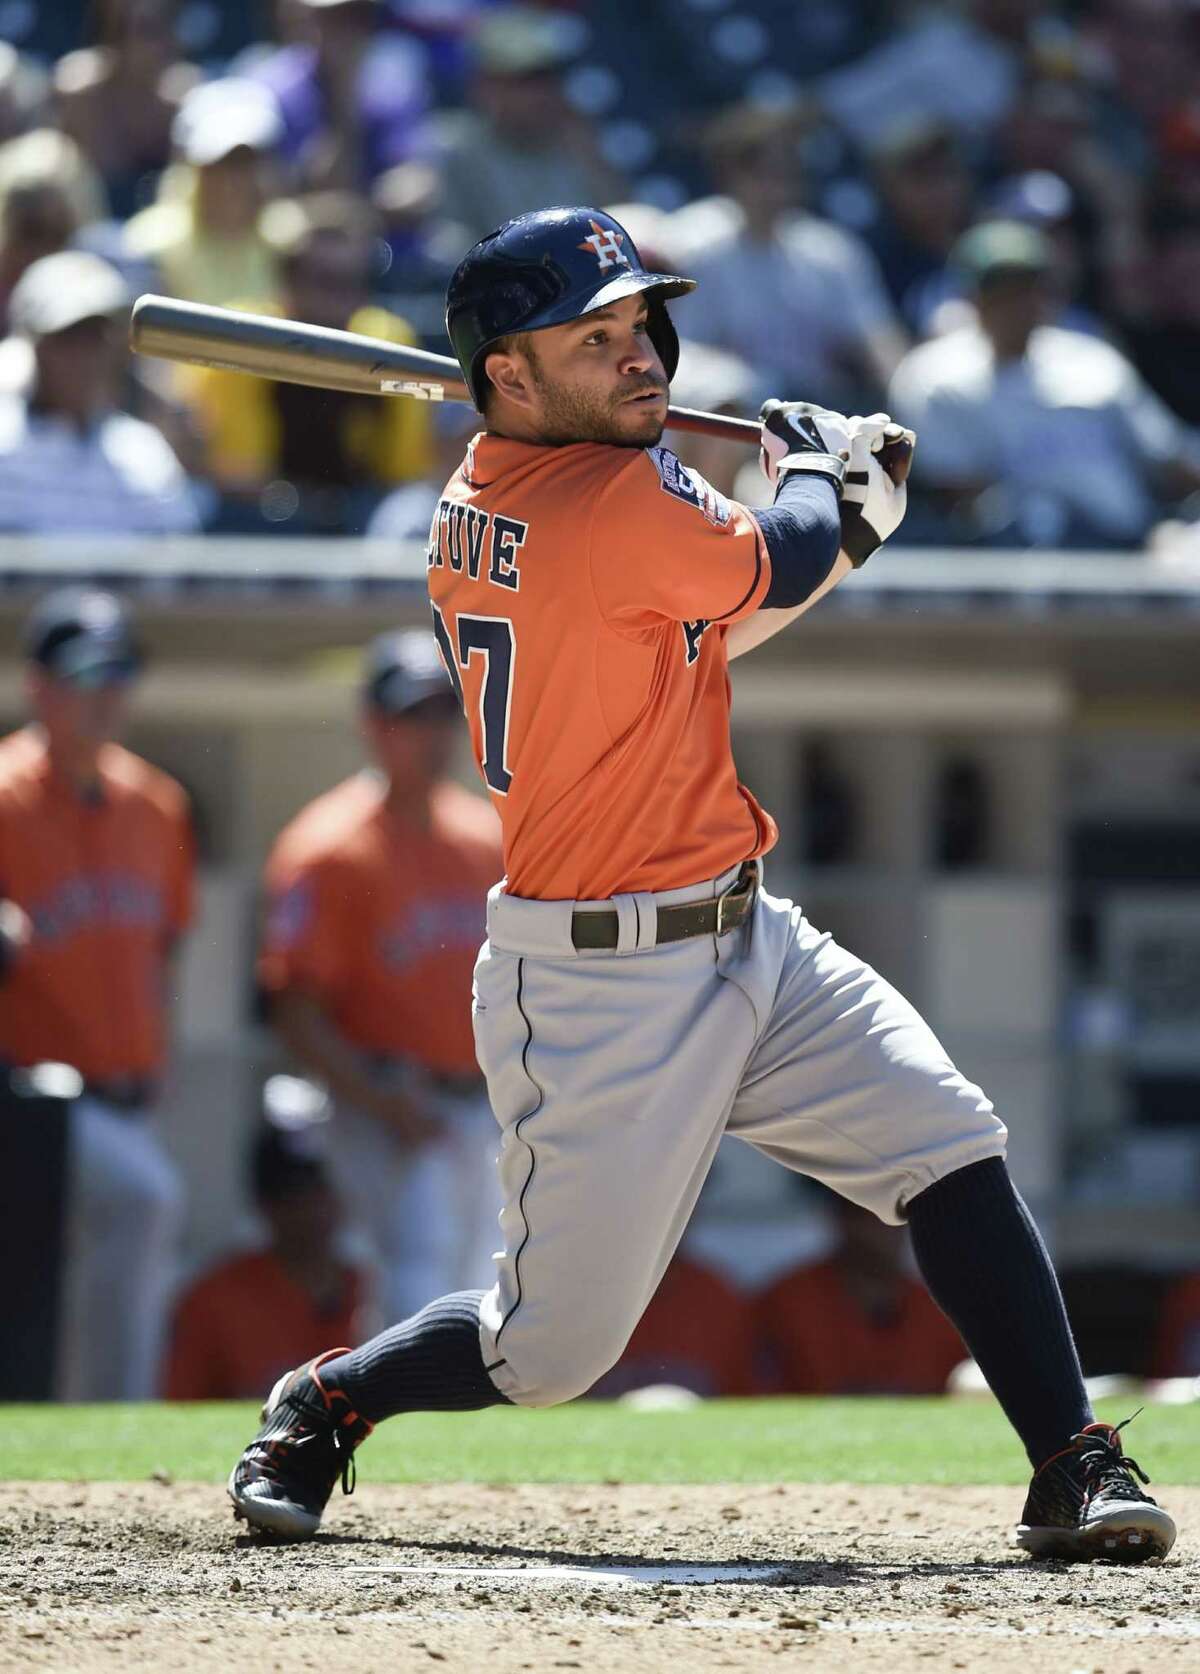 Jose Altuve was 2-for-4 in Wednesday's 7-2 win over the Padres, his seventh straight multi-hit game. Altuve is hitting .471 over that seven-game span.